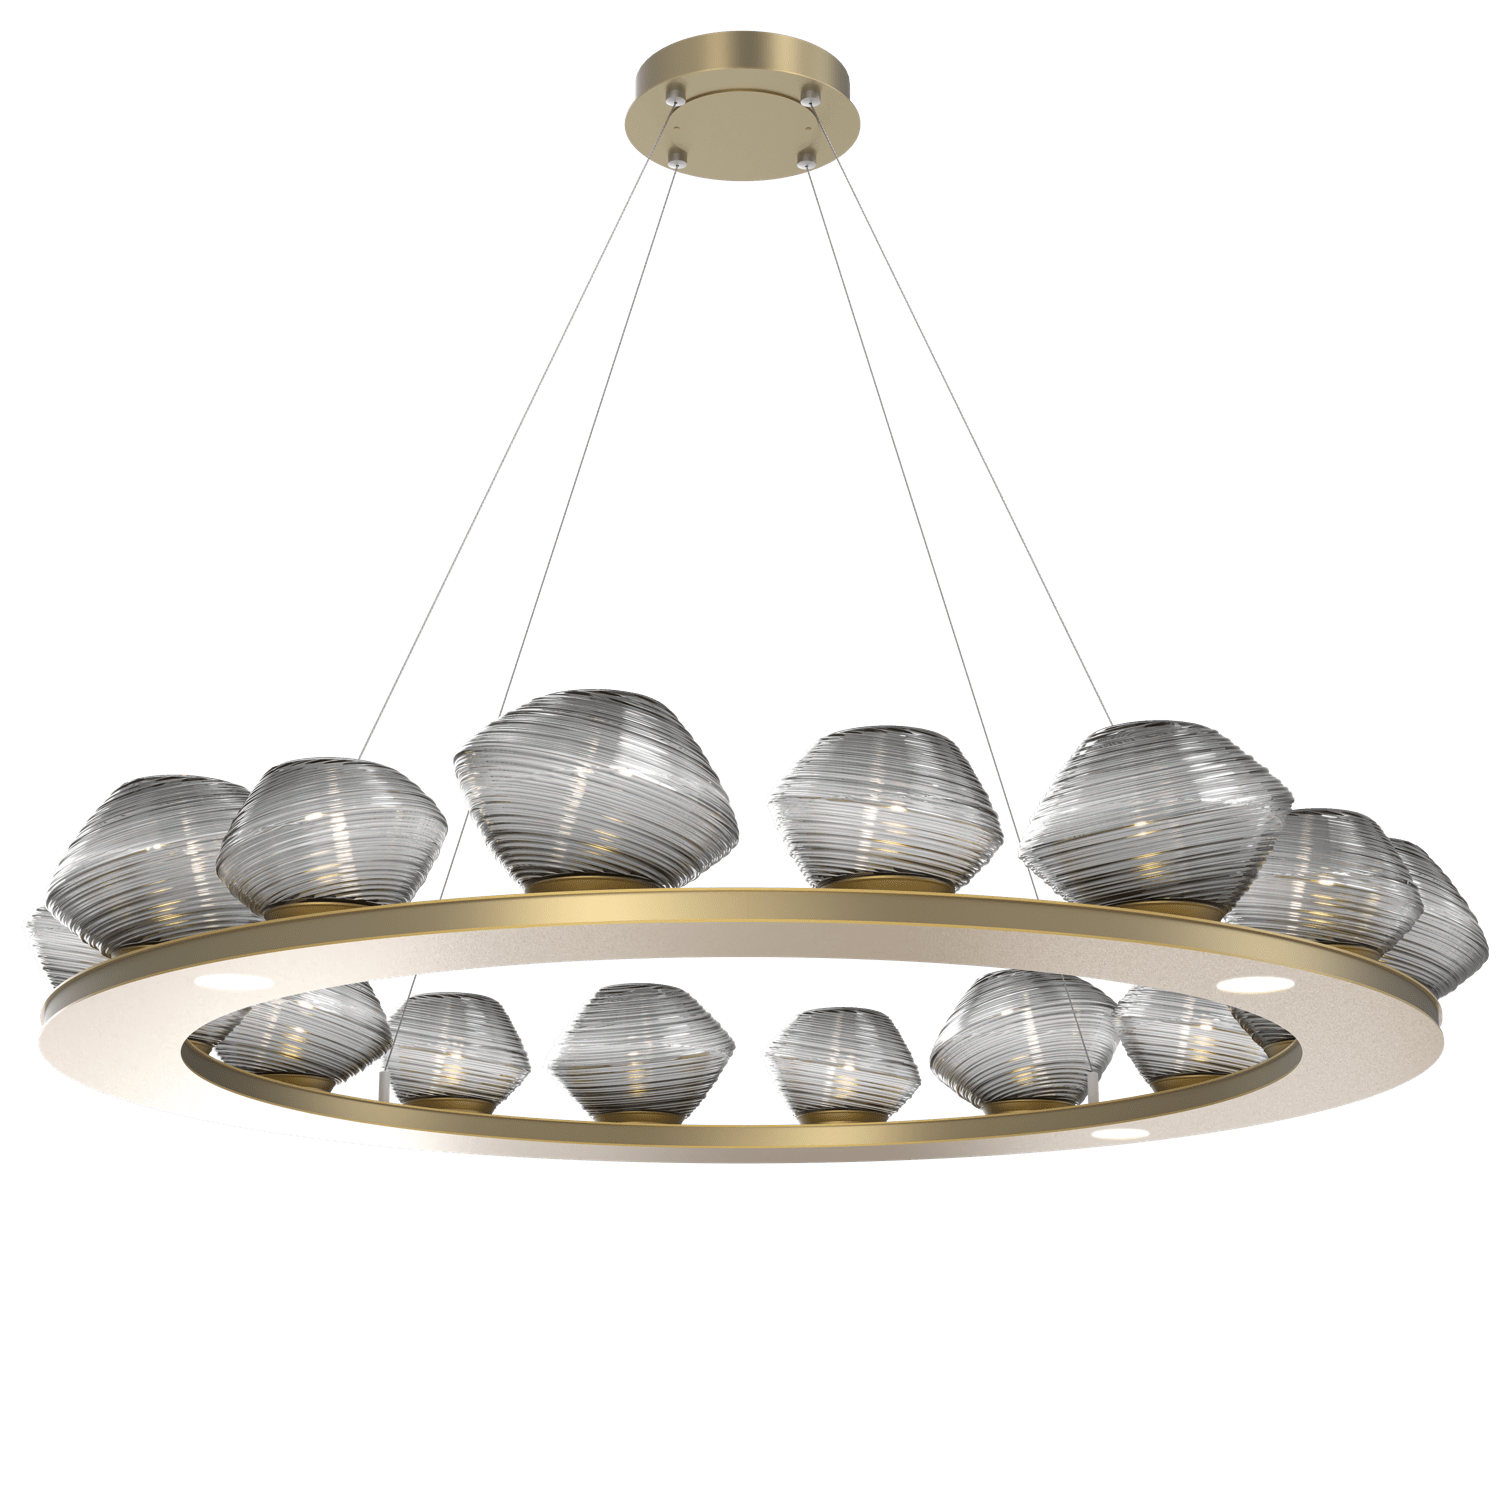 CHB0089-0D-GB-S-Hammerton-Studio-Mesa-48-inch-ring-chandelier-with-gilded-brass-finish-and-smoke-blown-glass-shades-and-LED-lamping